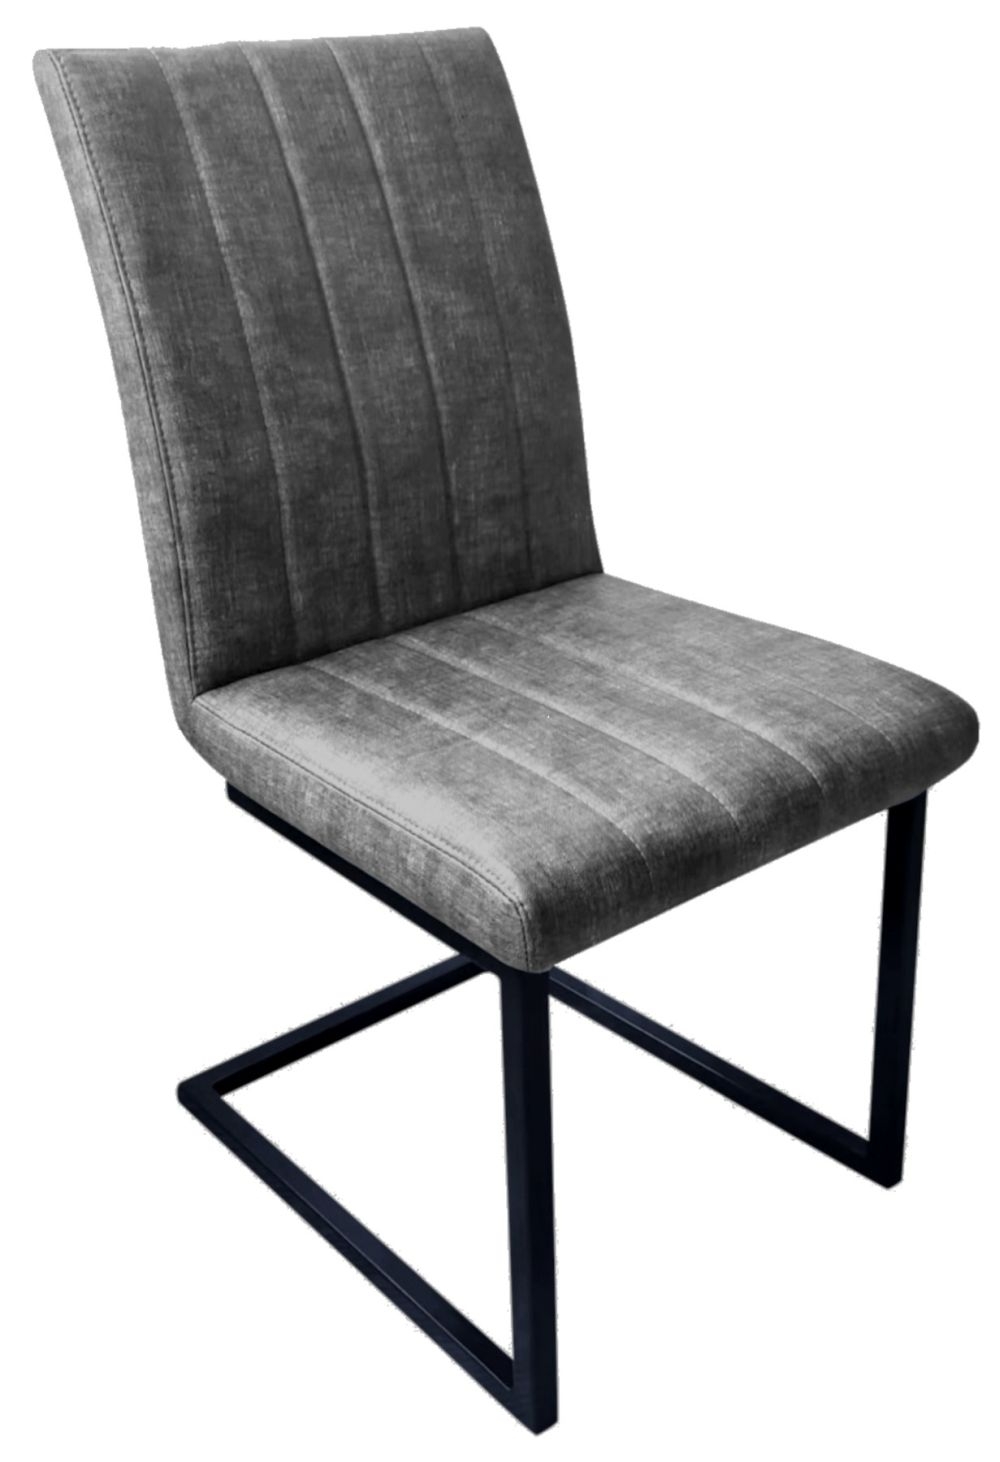 Fusion Fabric Retro Stitch Dining Chair Sold In Pairs